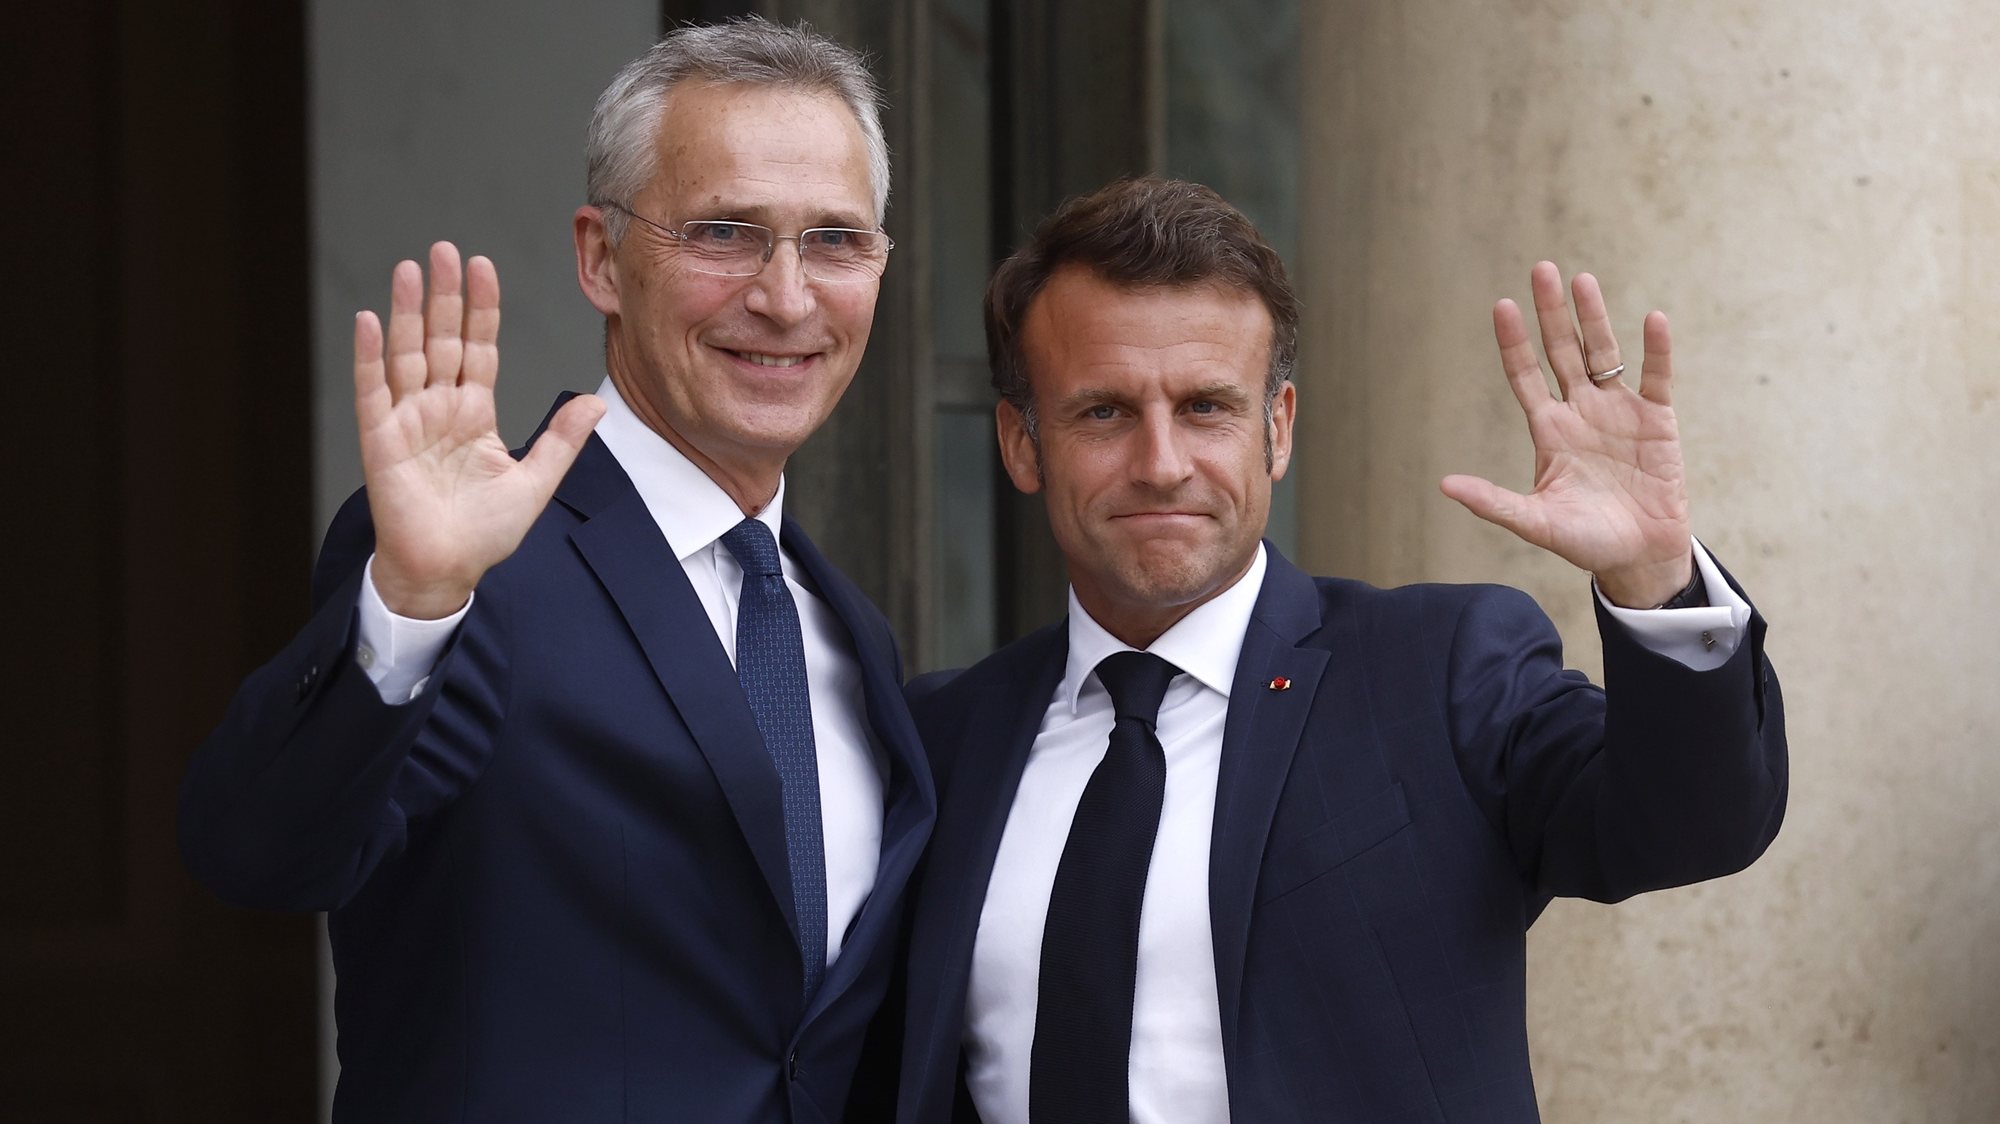 epa10715771 French President Emmanuel Macron (R) and NATO Secretary General Jens Stoltenberg (L) wave upon their meeting at the Elysee Palace in Paris, France, 28 June 2023. Their meeting takes place as part of preparations for the upcoming NATO Summit in Vilnius between 11 and 12 July.  EPA/YOAN VALAT